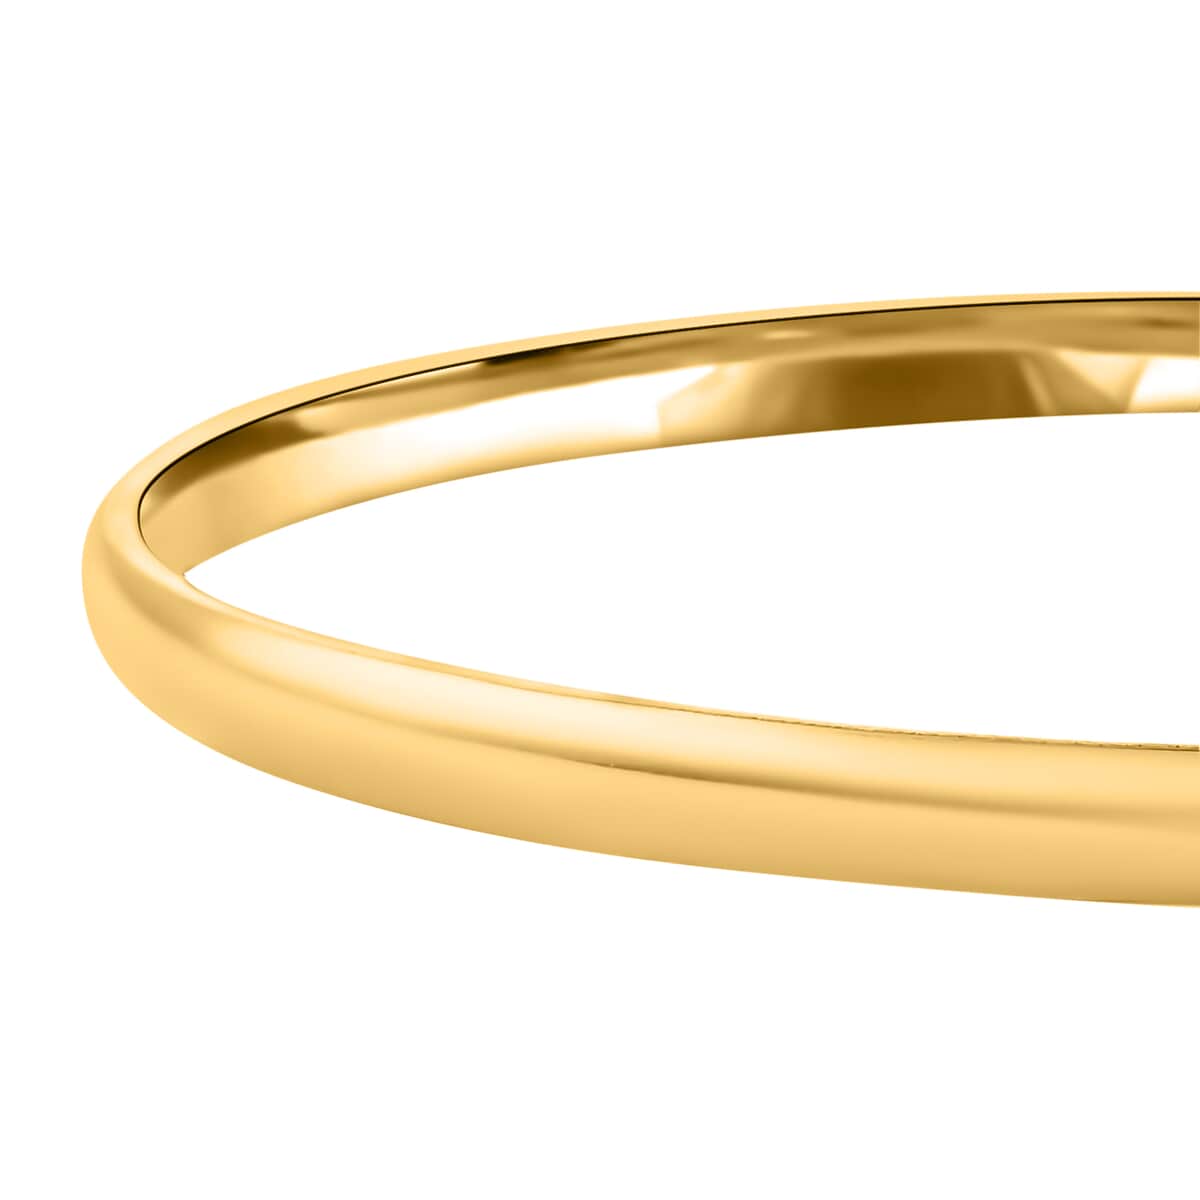 7 Stack Bangle Bracelet in ION Plated Yellow Gold Stainless Steel (8.00 In) 72.80 Grams image number 2